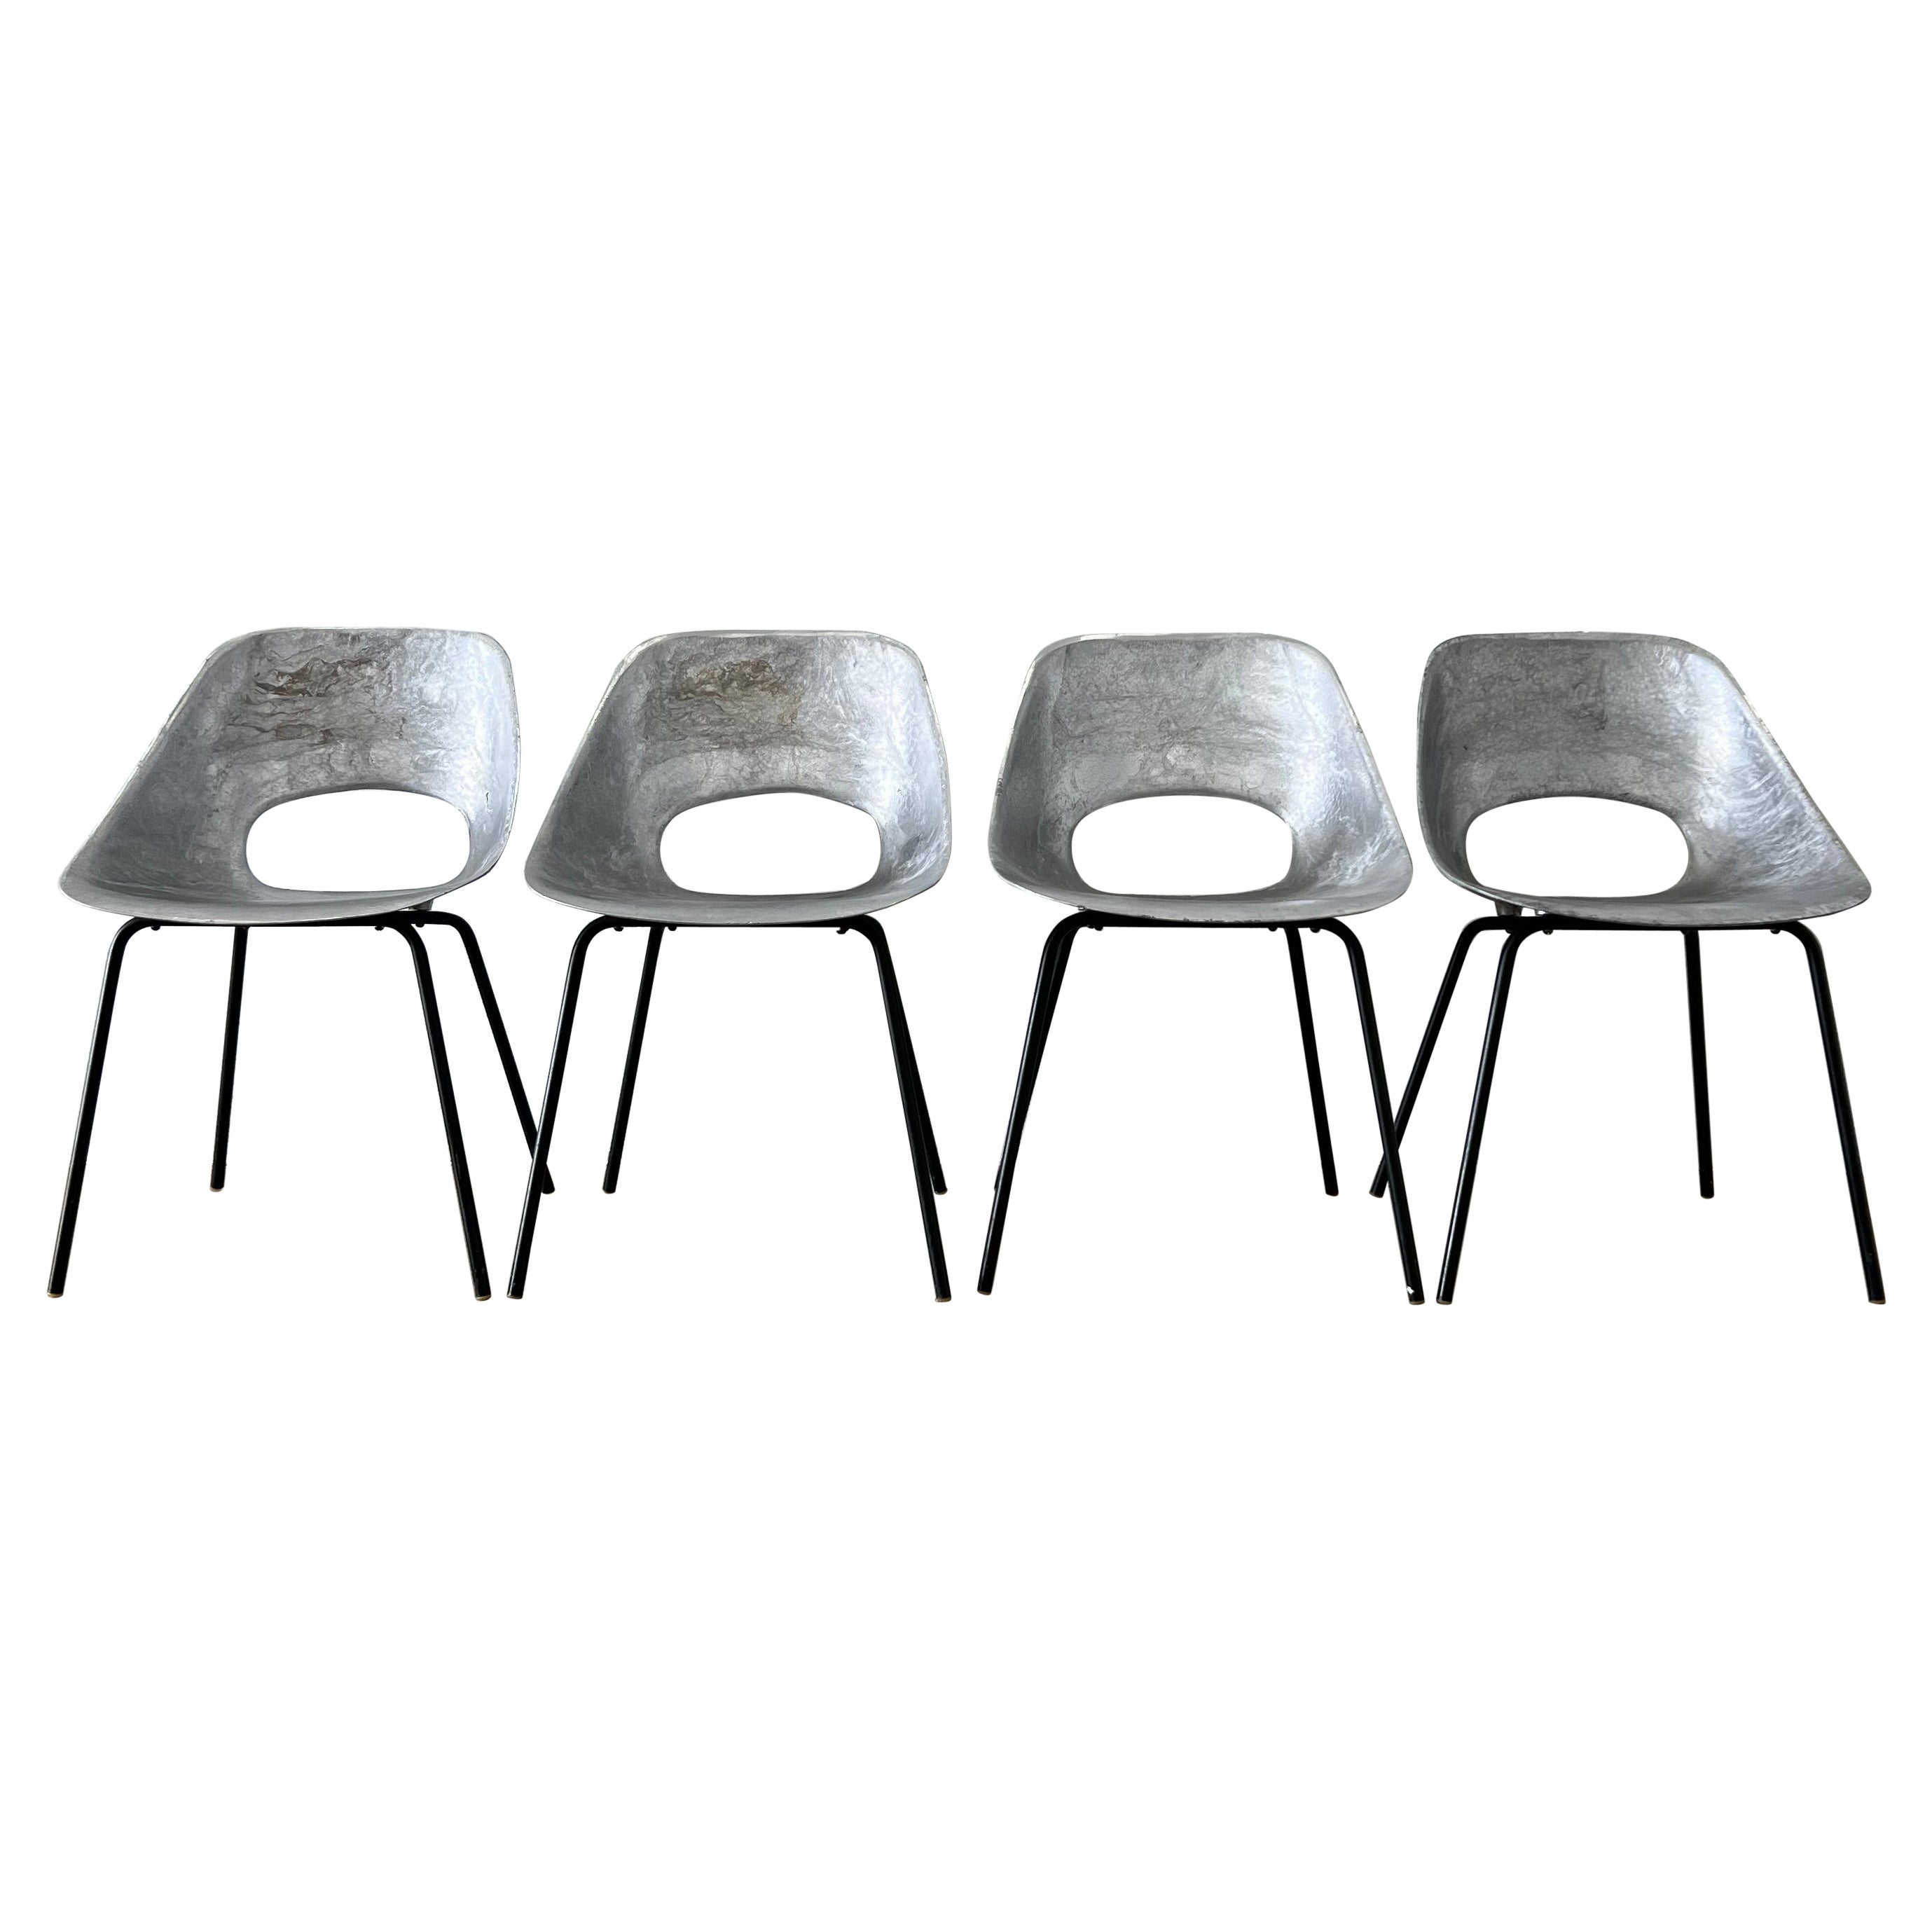 Cast Aluminum Tulipe Chairs by Pierre Guariche for Steiner, Set of 4